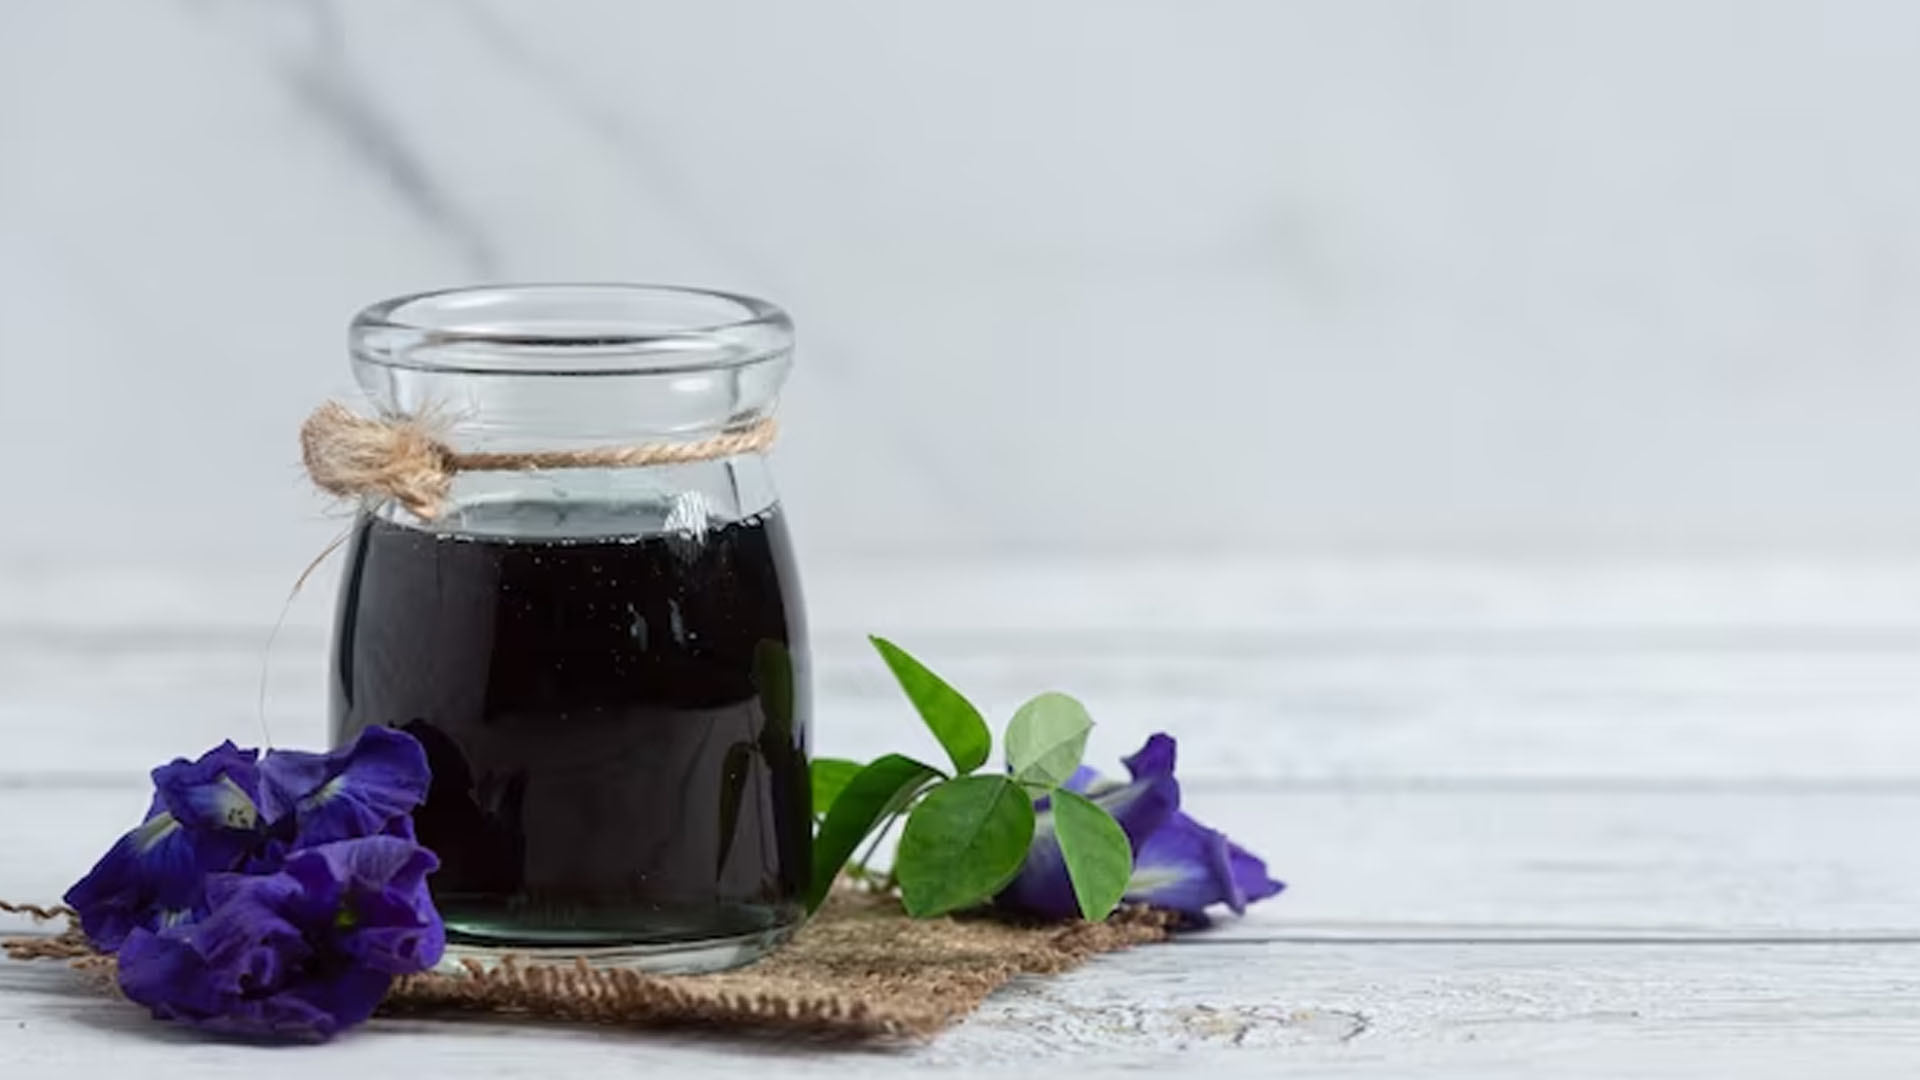 What Are The Health Benefits of Blackstrap Molasses?